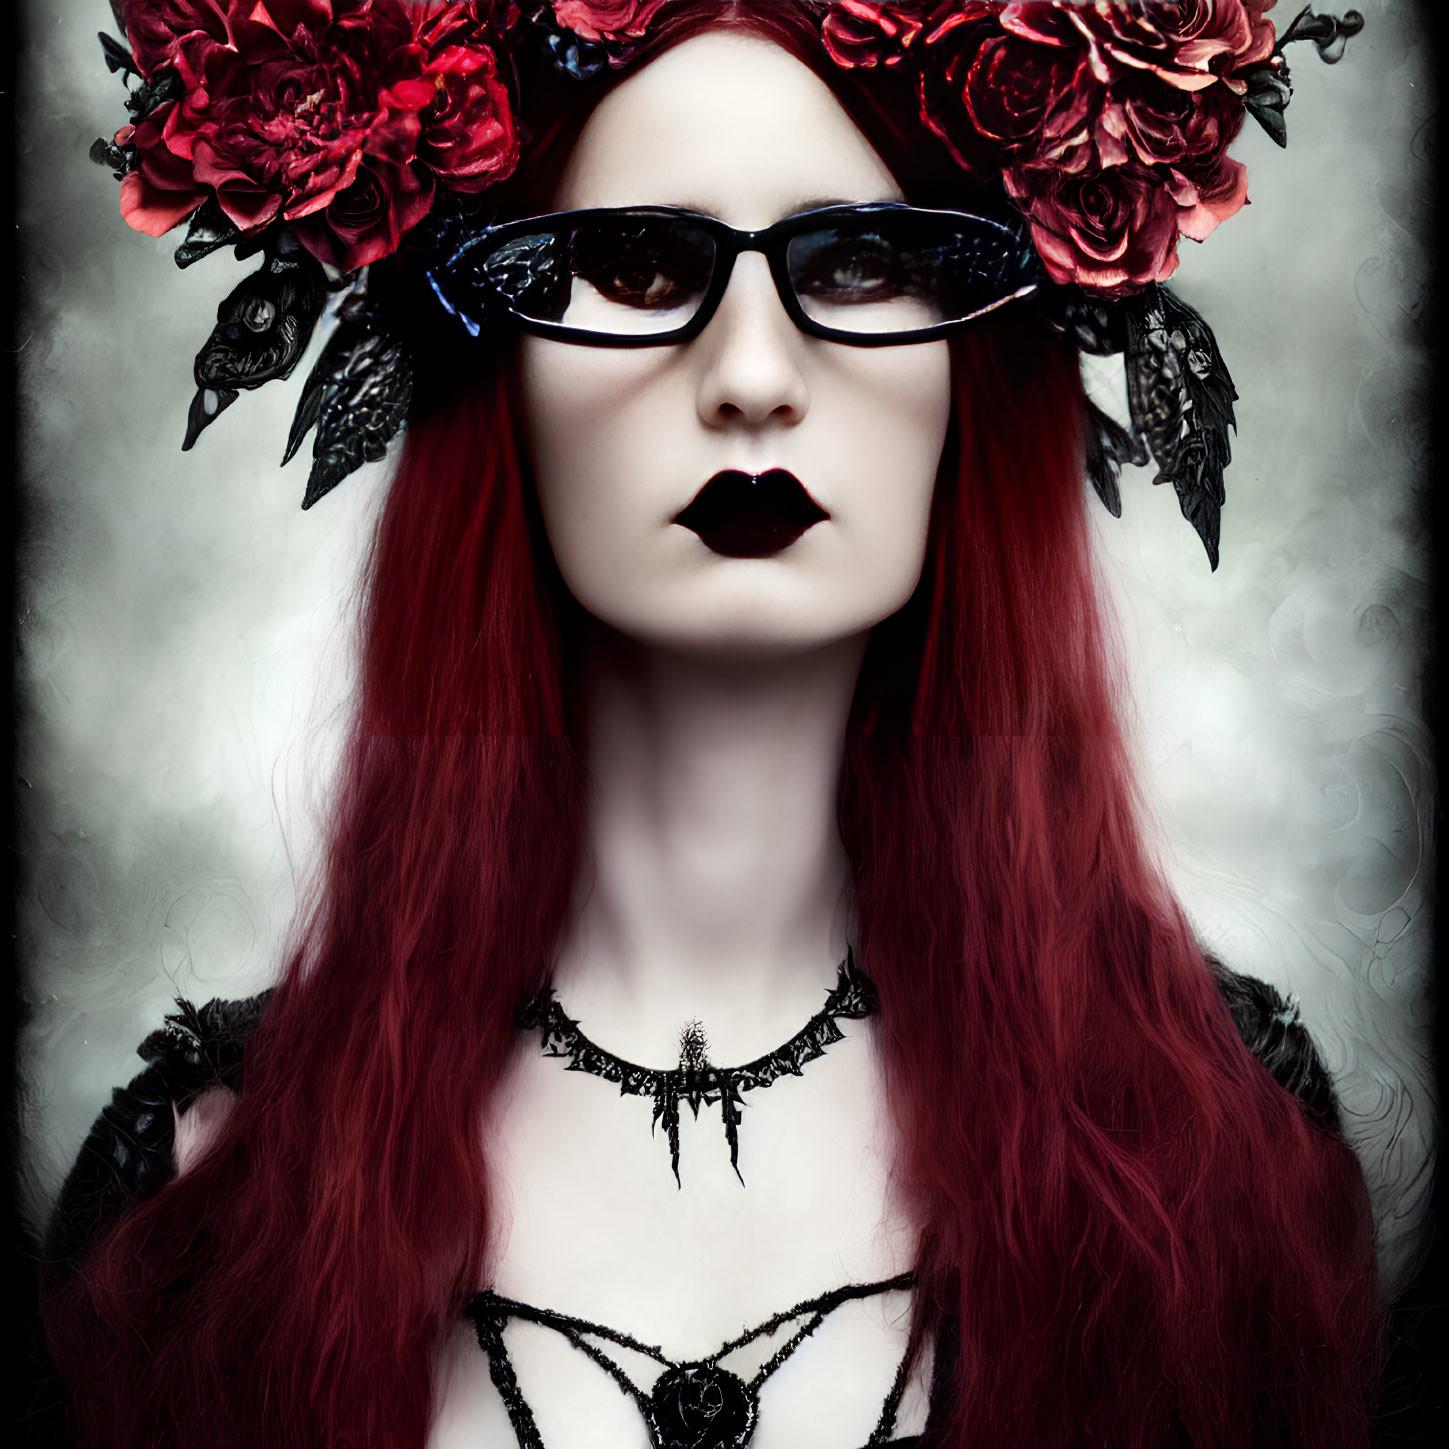 Red-haired woman in black sunglasses and floral headpiece with dark lipstick, against blurred background